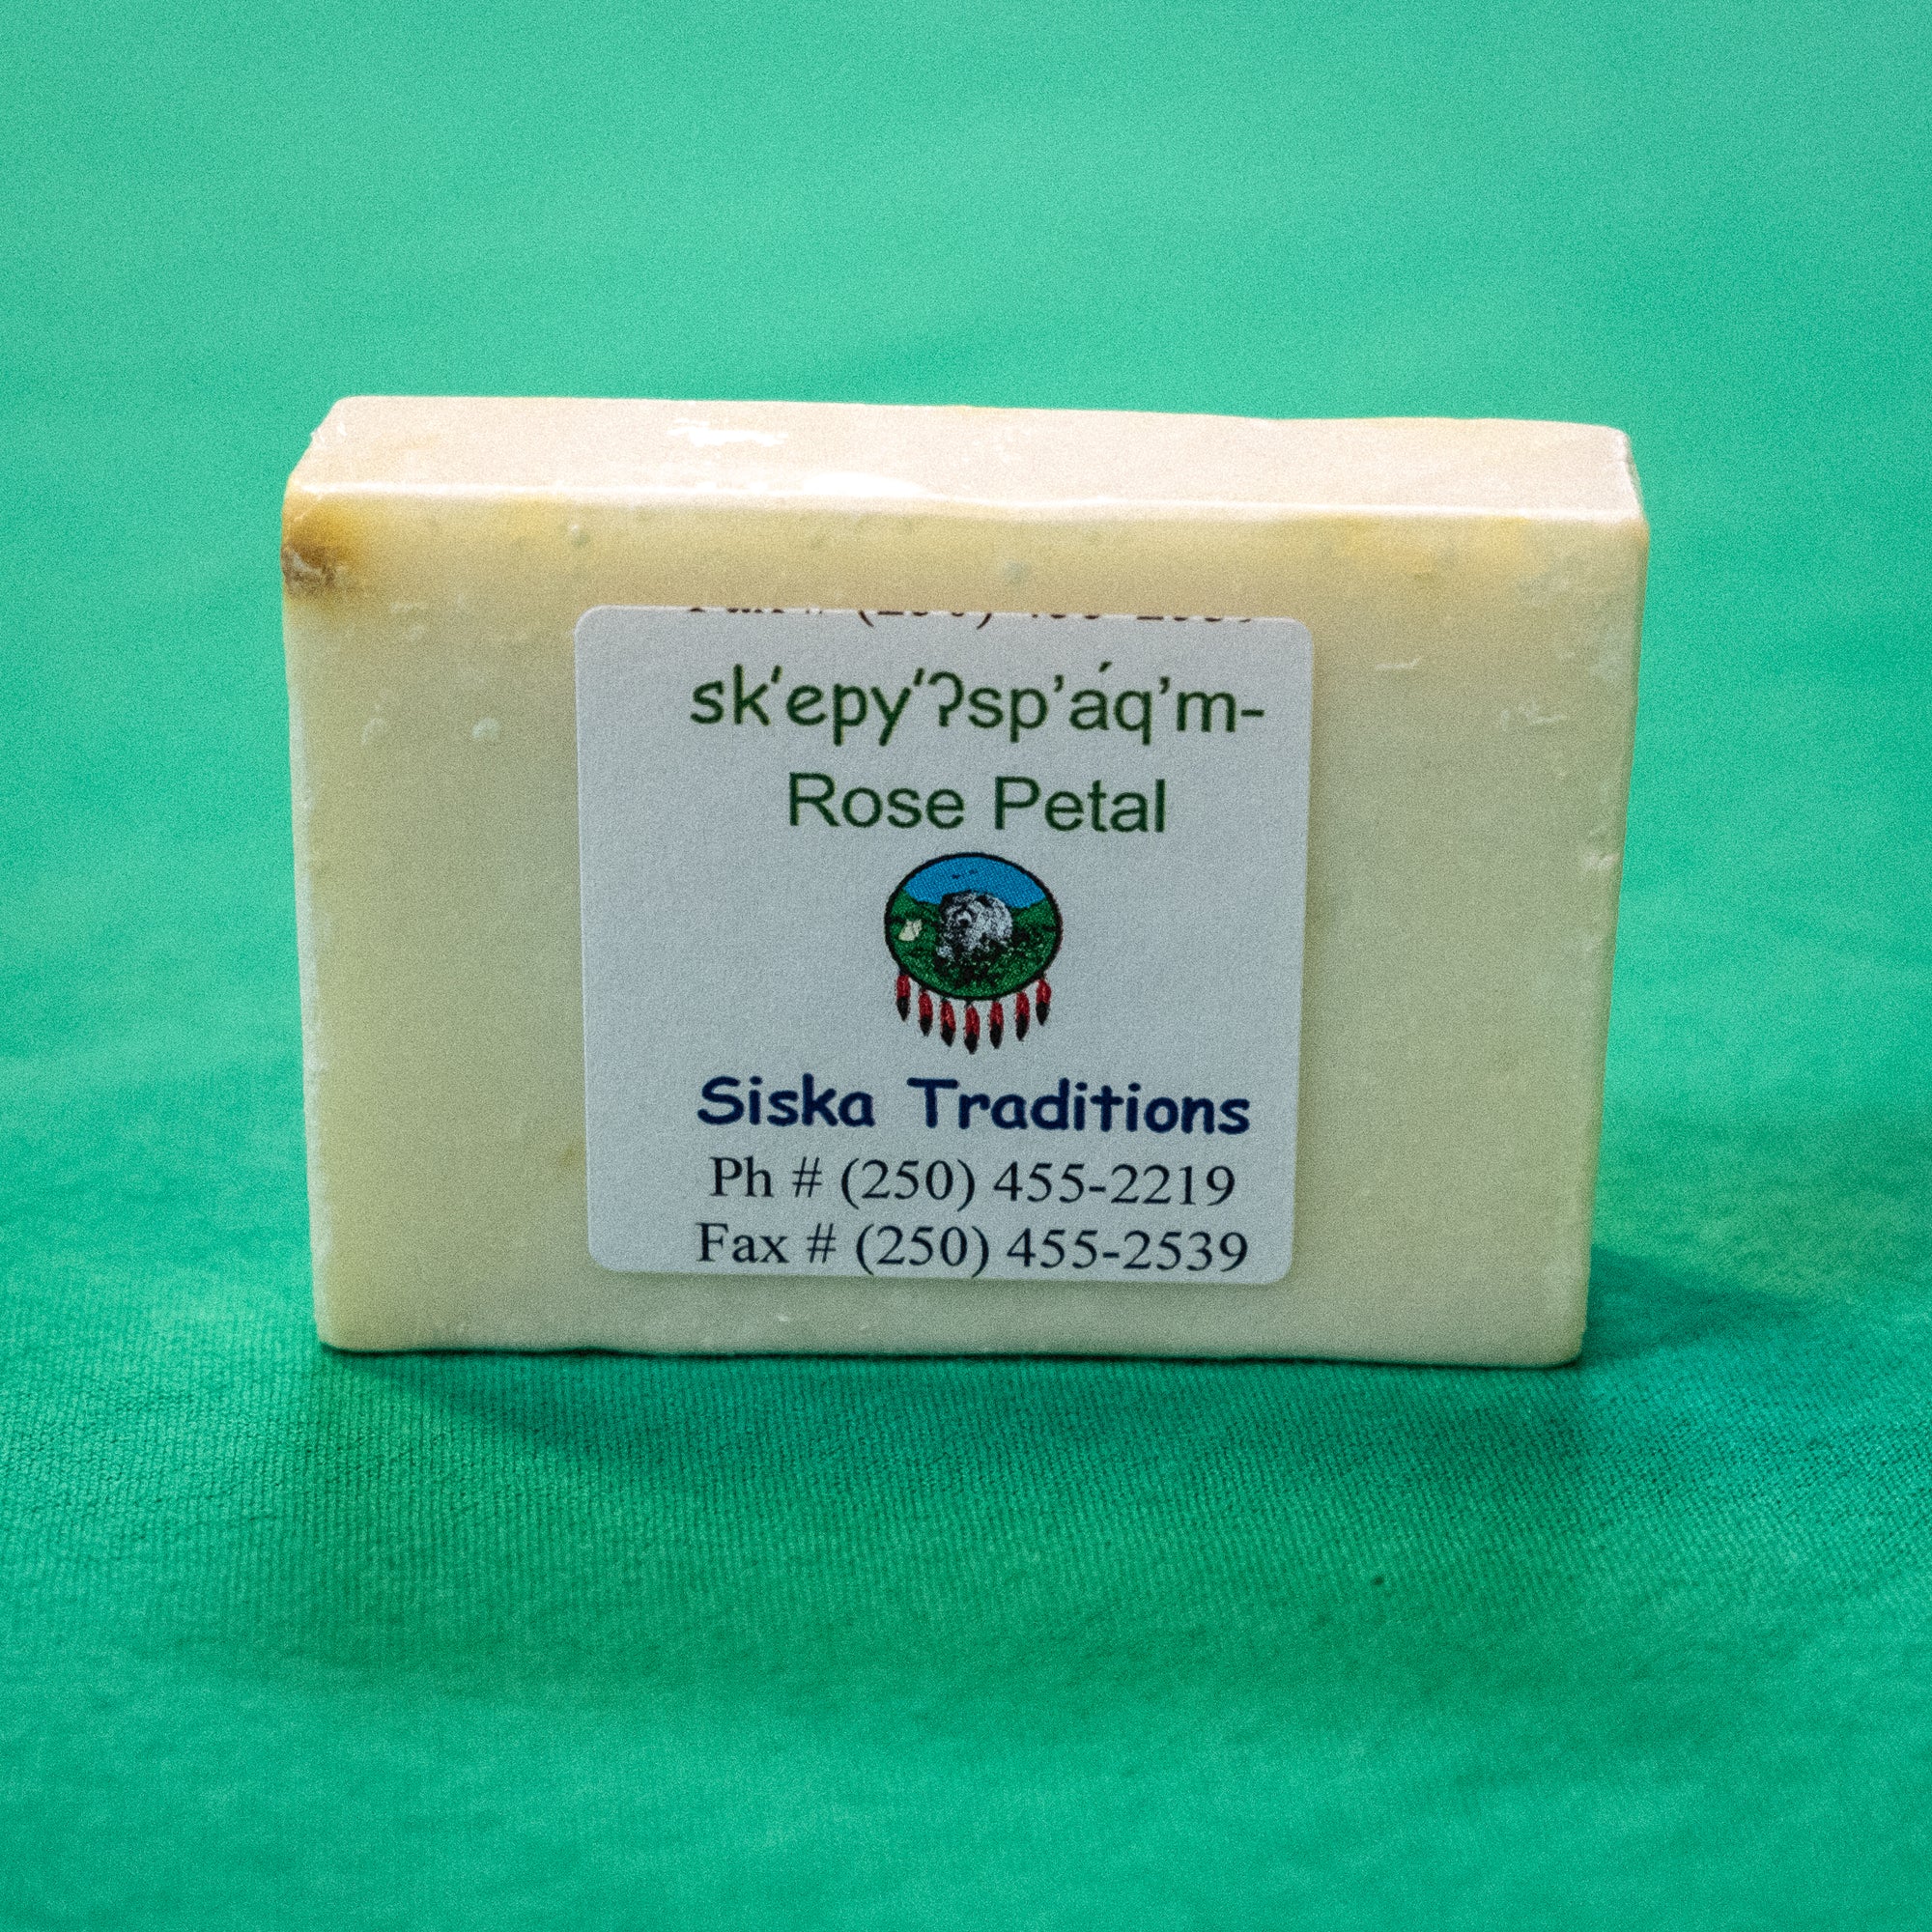 A bar of soap with a label on it that says "Rose petal. Siska Traditions. Phone: 250-455-2219. Fax: 250-455-2539." End of image description.